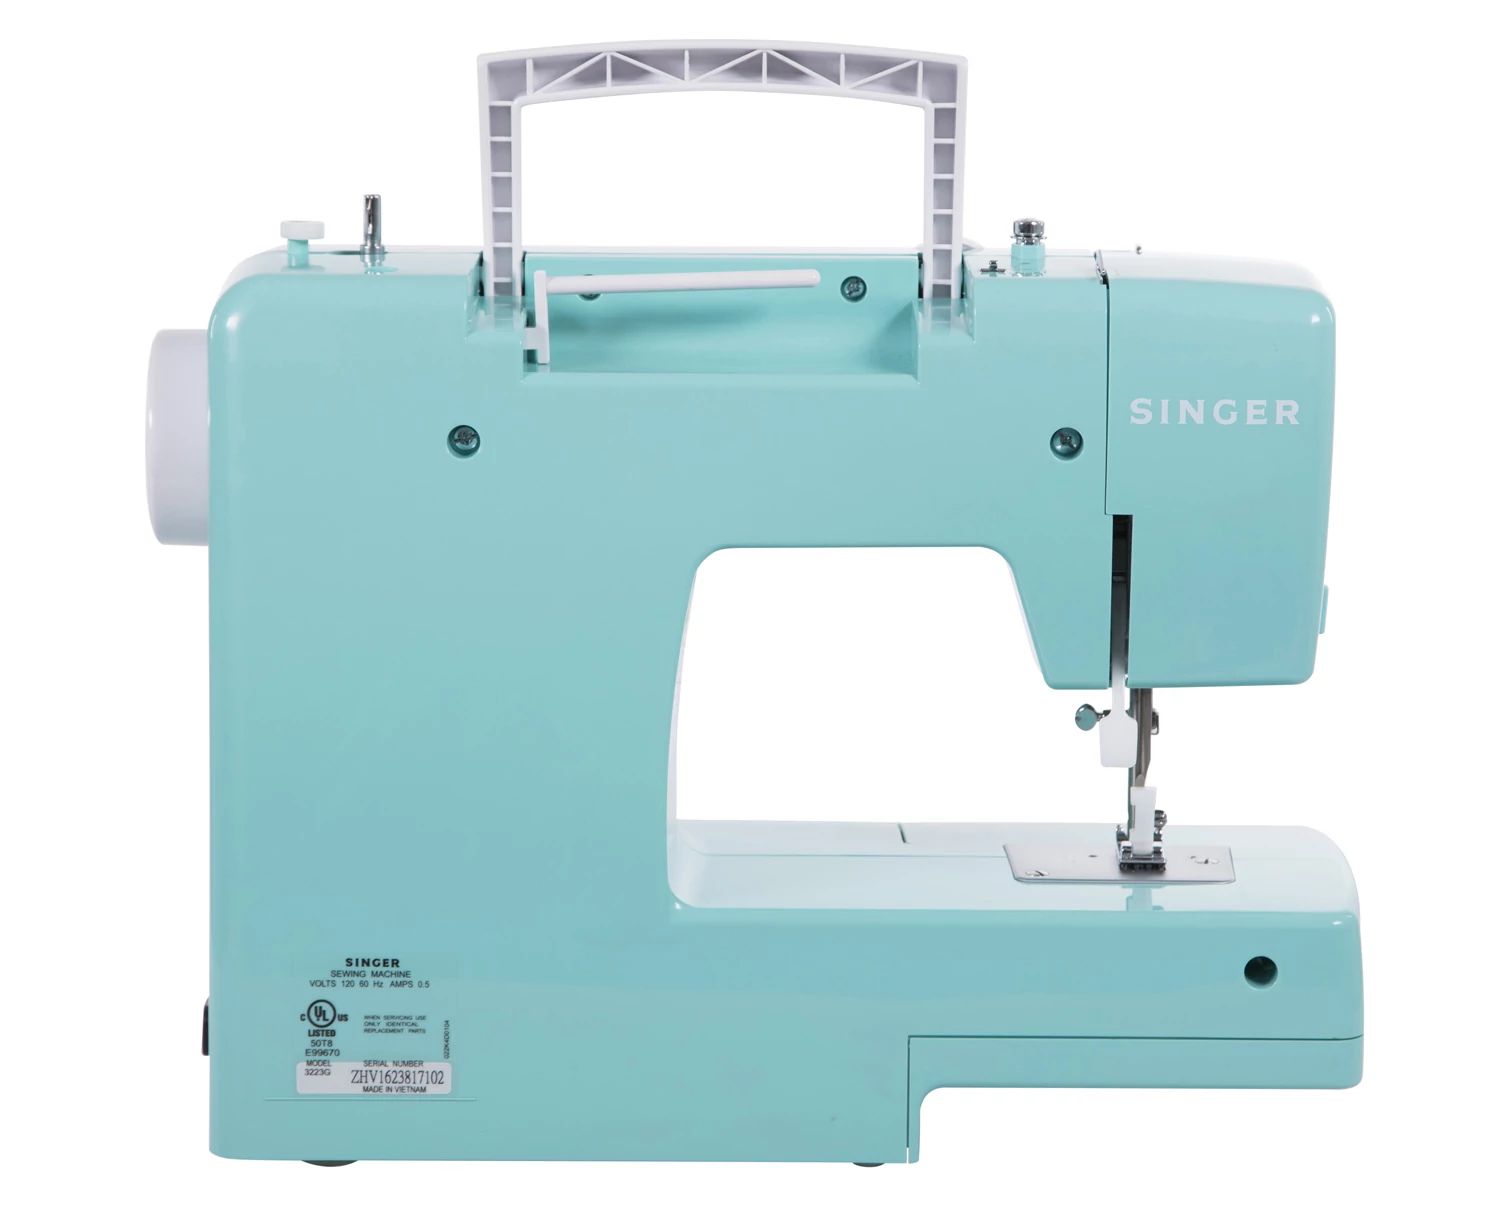 Machine Simple™ 3223G Sewing